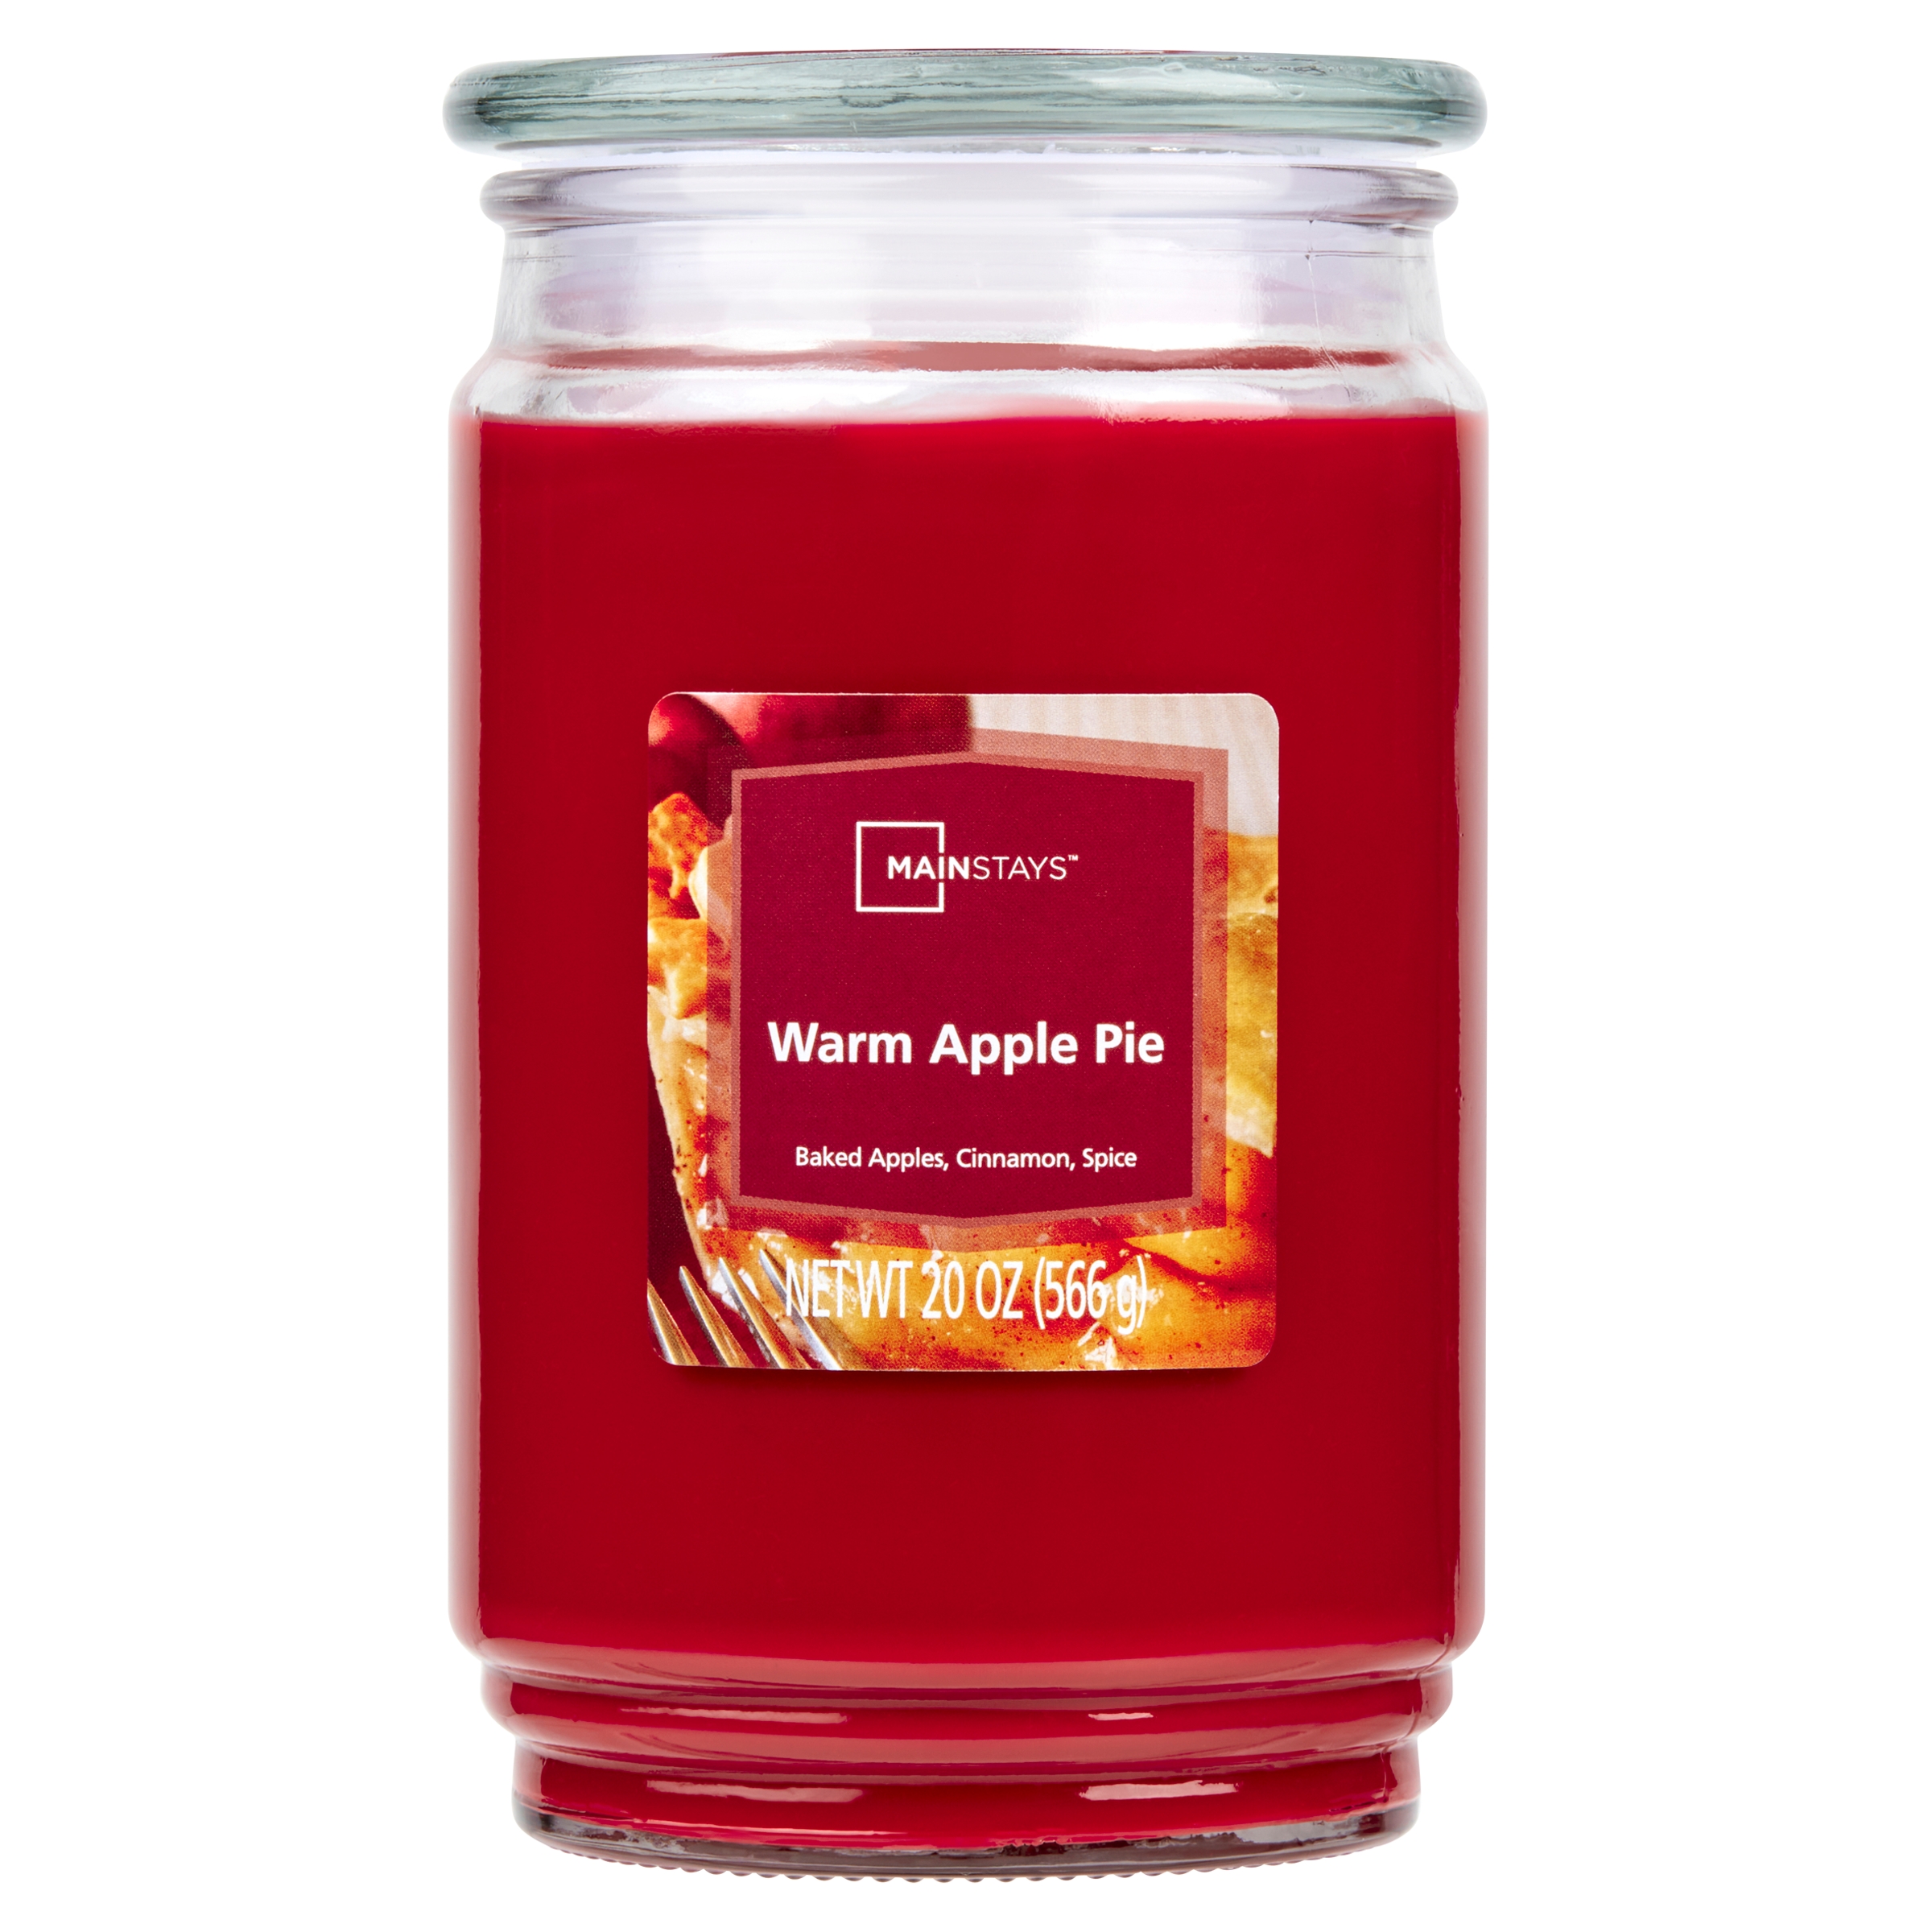 Mainstays Warm Apple Pie Scented Single-Wick Large Glass Jar Candle, 20 oz - image 1 of 7